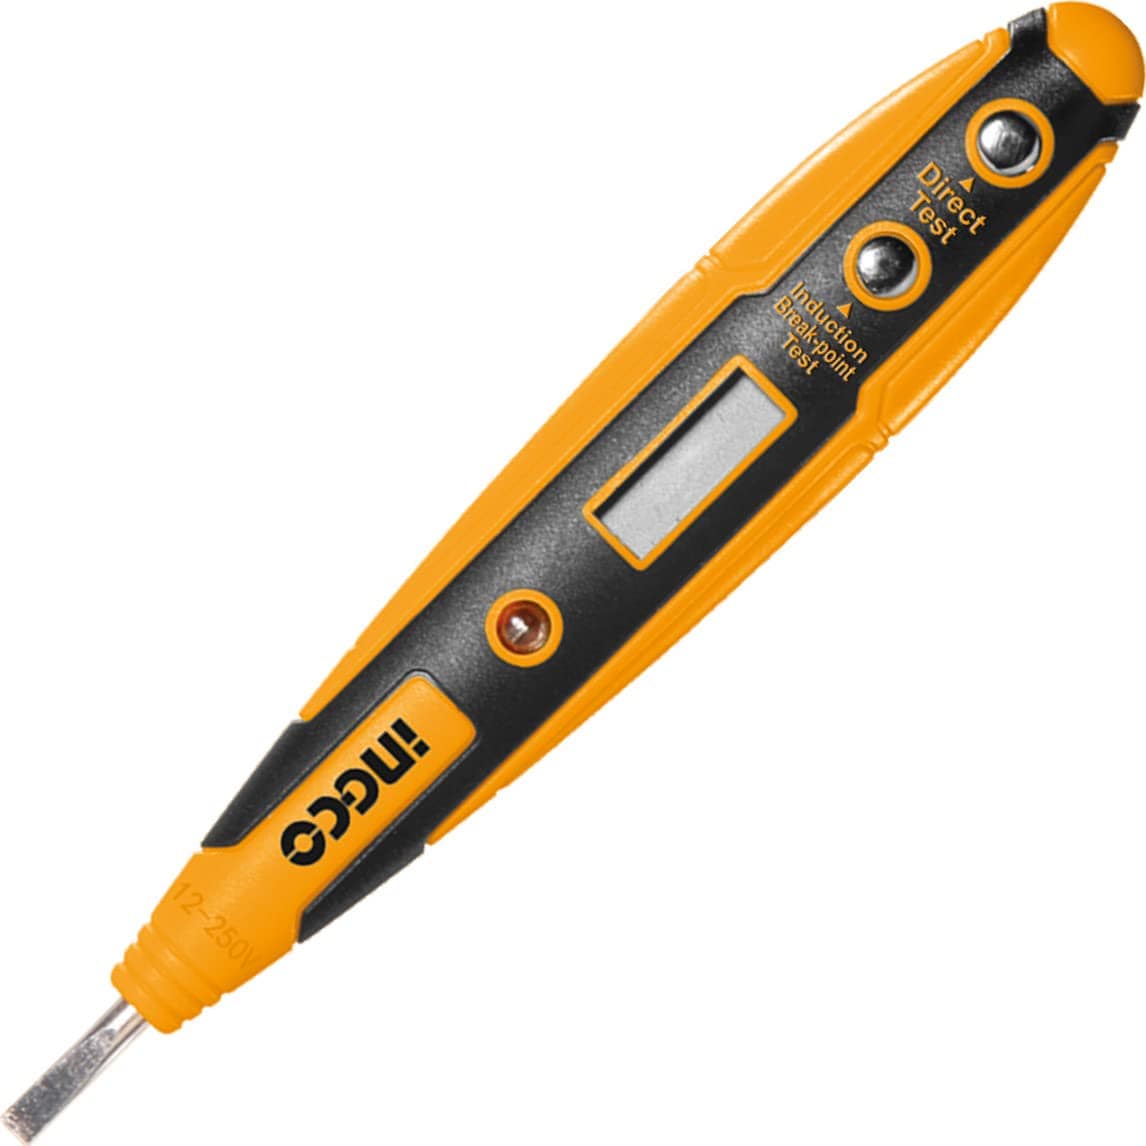 Ingco Digital Voltage Tester HSDT2201 | Supply Master Accra, Ghana Screwdrivers Buy Tools hardware Building materials